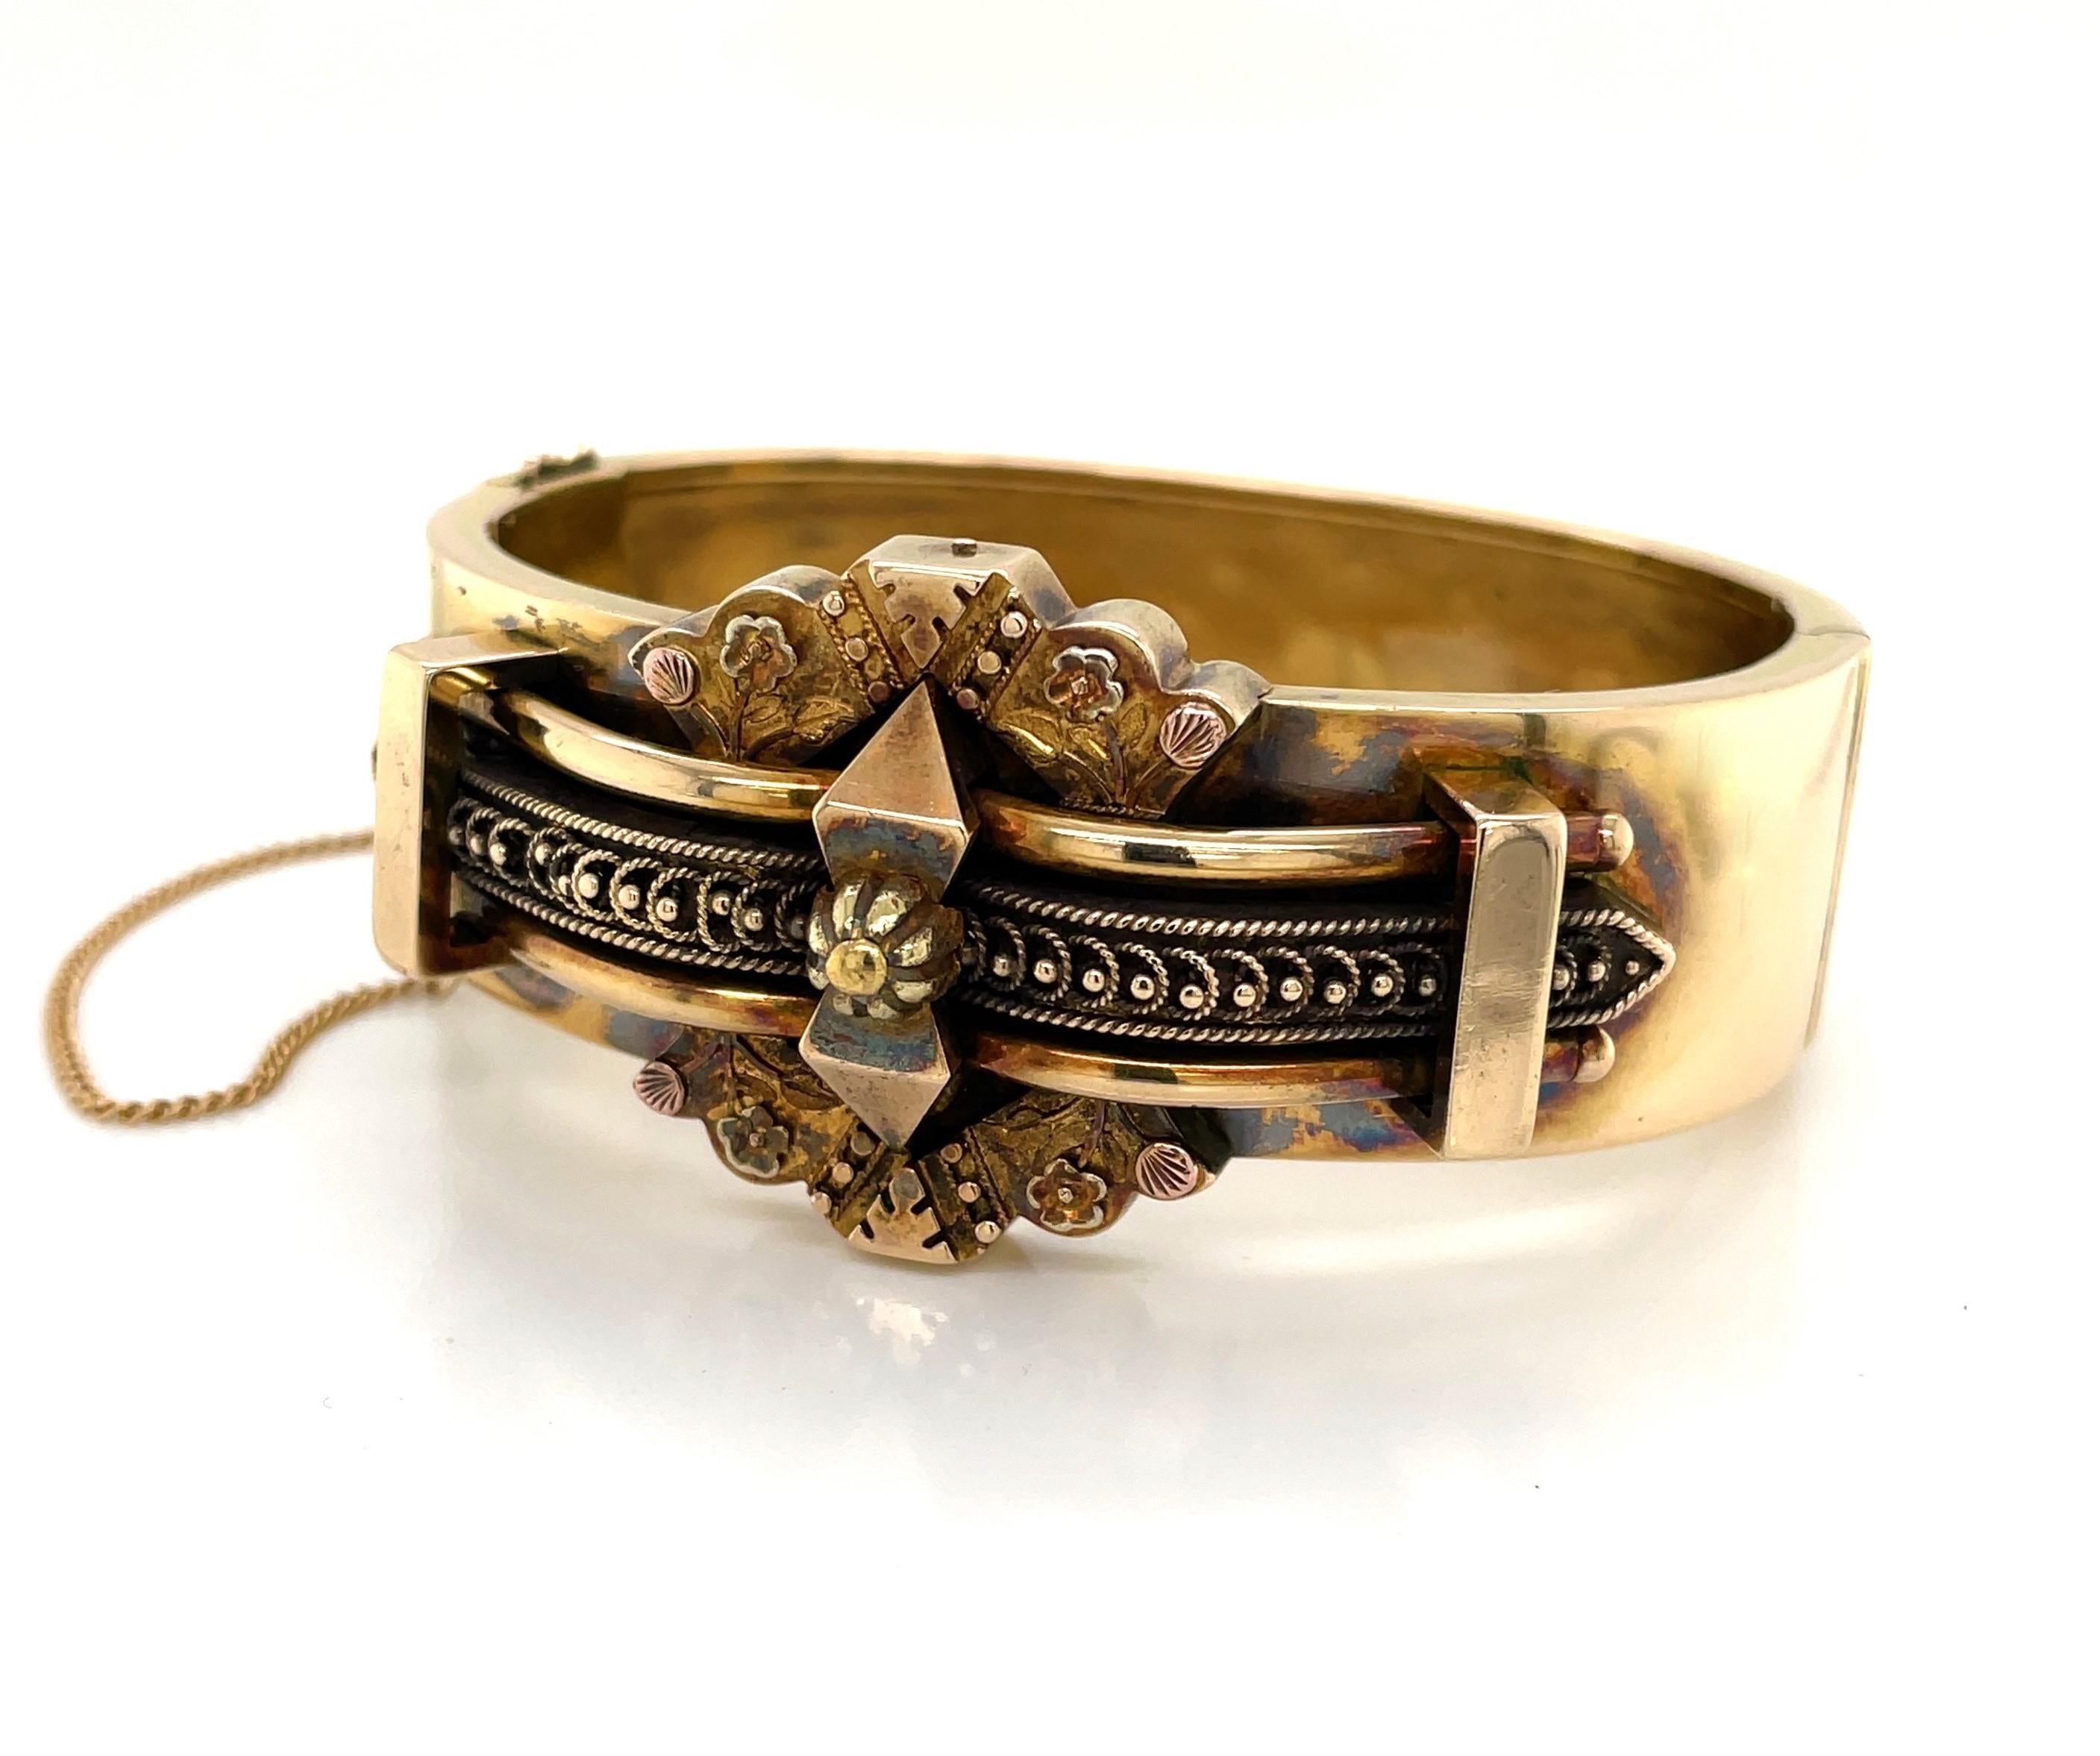 Ornately sculptured in fourteen karat (14K) yellow gold, this Victorian English bracelet is a real find. A 19th century estate piece, this stunning period bracelet has an acquired antique toned finish which is original and intentionally left